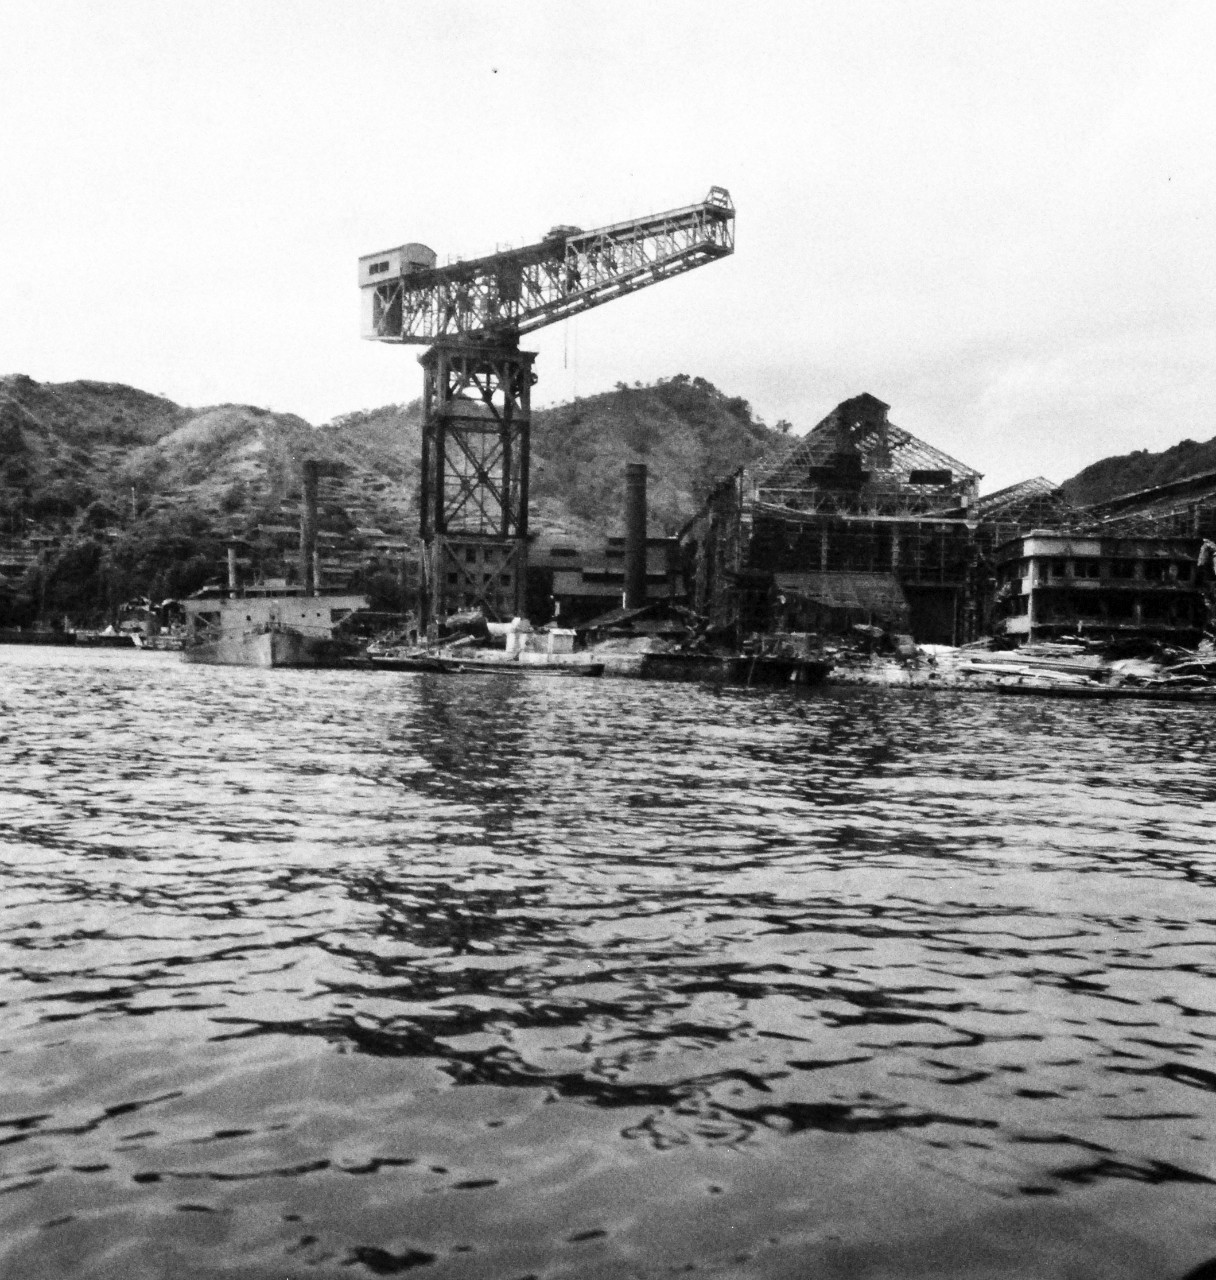 80-G-264879:  Nagasaki, Japan, 1945.   Showing the bomb damage on the waterfront from August 9, 1945.  Photographed by crew of USS Chenango (CVE-28), released September 14, 1945.  Official U.S. Navy photograph, now in the collections of the National Archives.   (2015/12/01).